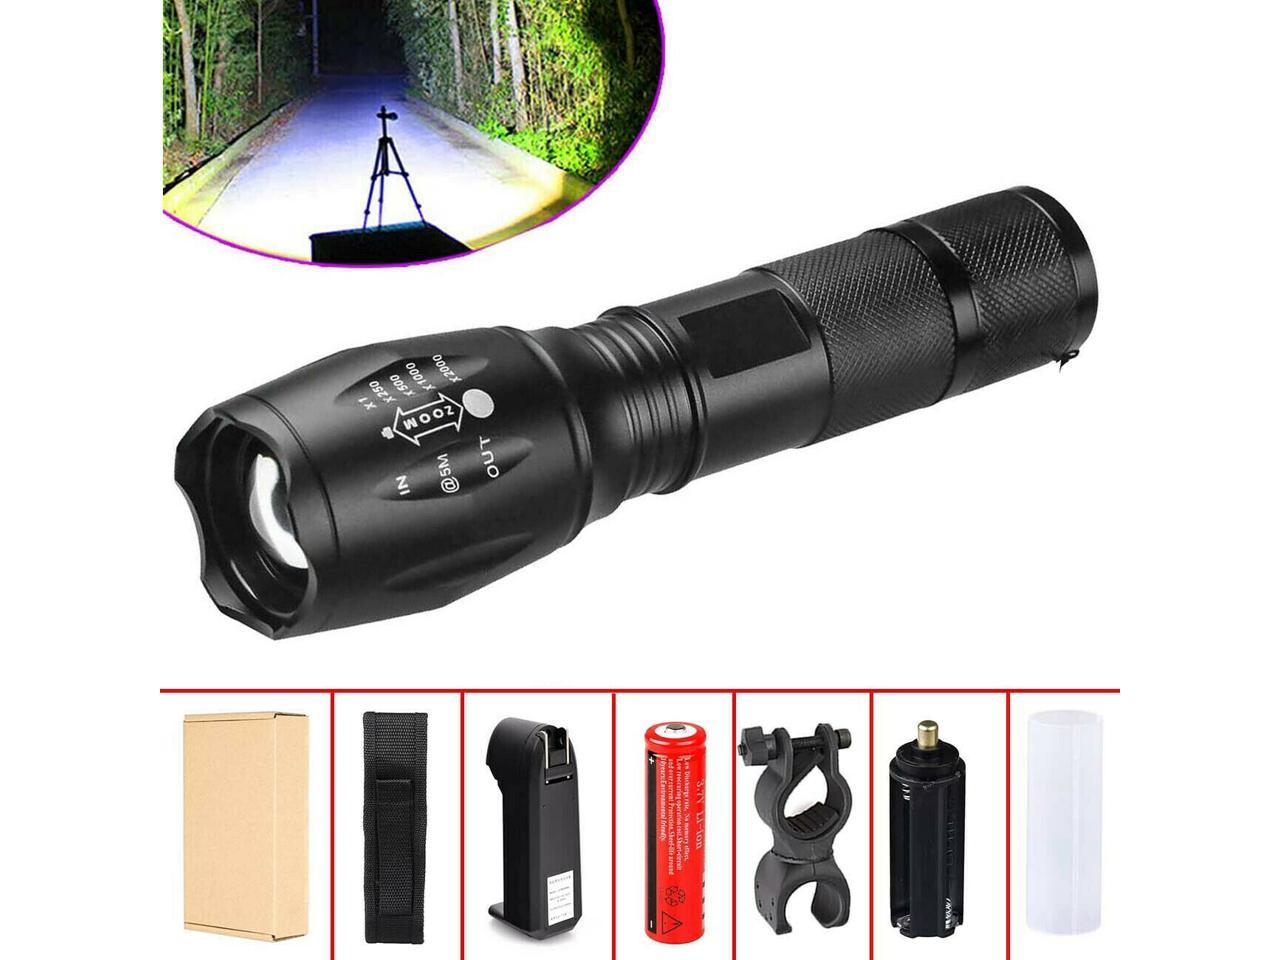 ULTRAFIRE TACTICAL TORCH LED MODEL G700 FLASHLIGHT BATTERY RECHARGEABLE 18650 